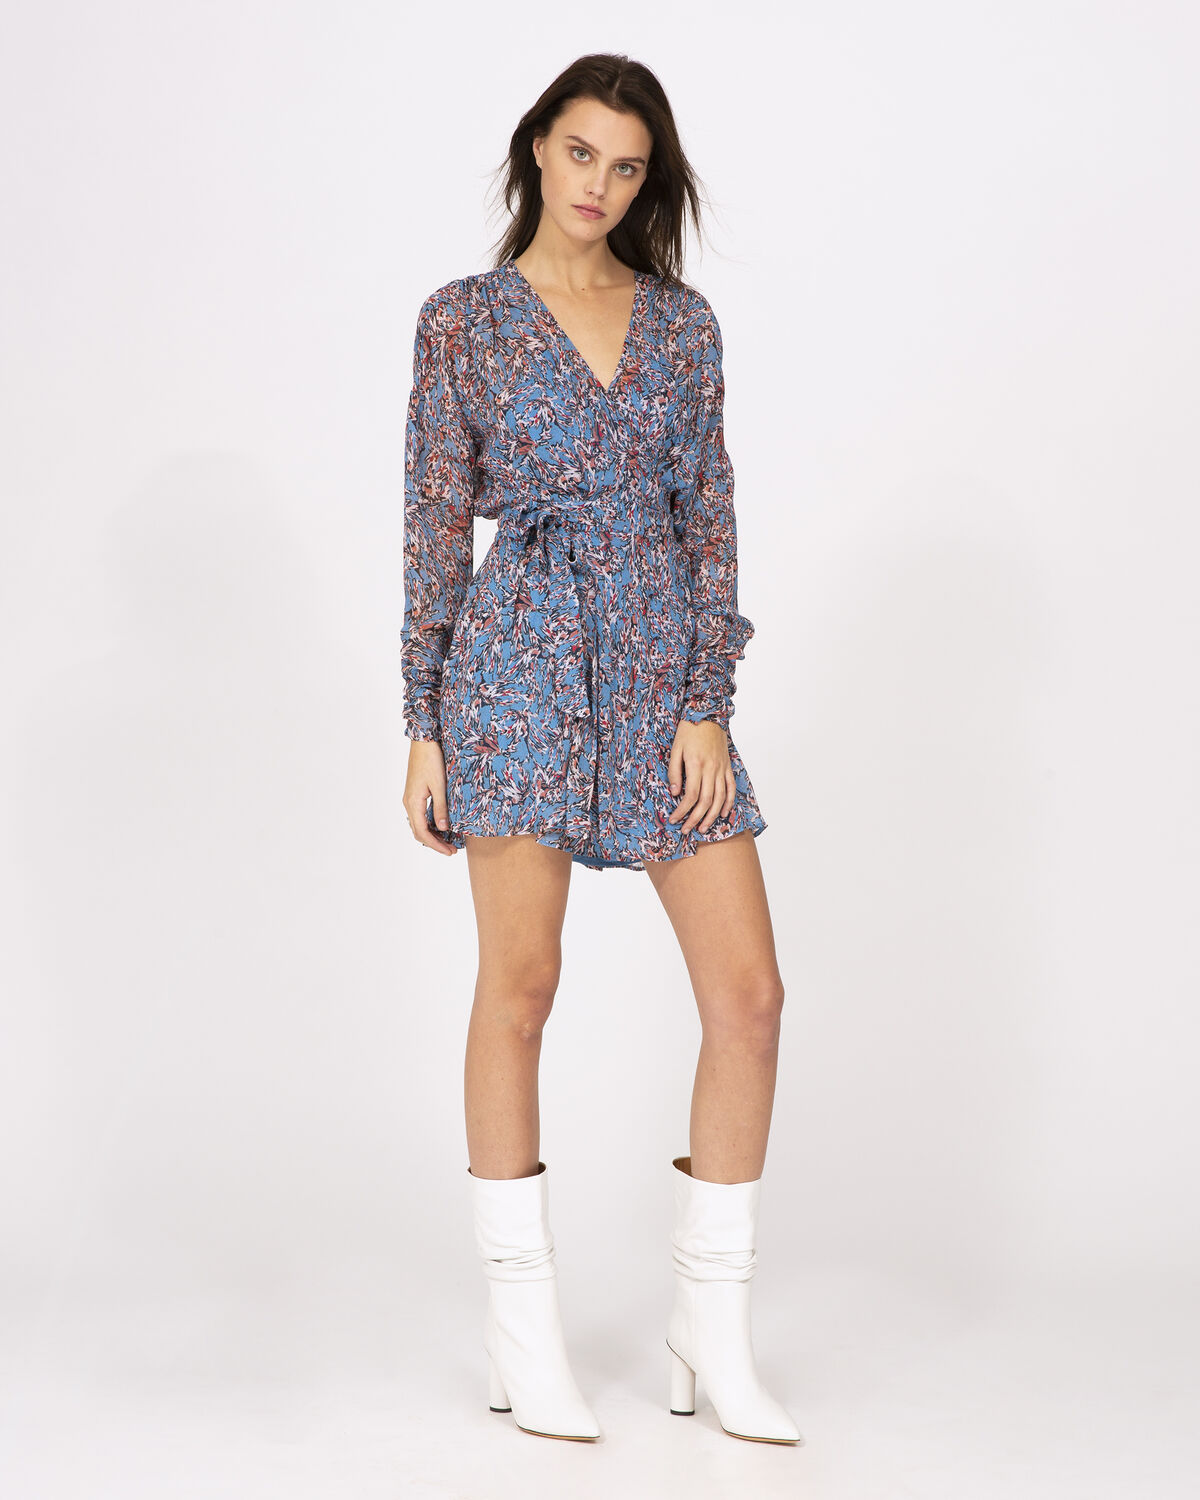 Photo of IRO Paris Bustle Dress Blue - This Long-sleeve Wrap Dress Has It All: A Deep V Neckline, A Colourful Print And Gathered Details. Combine It With White Boots For A Resolutely Modern Look. Dresses